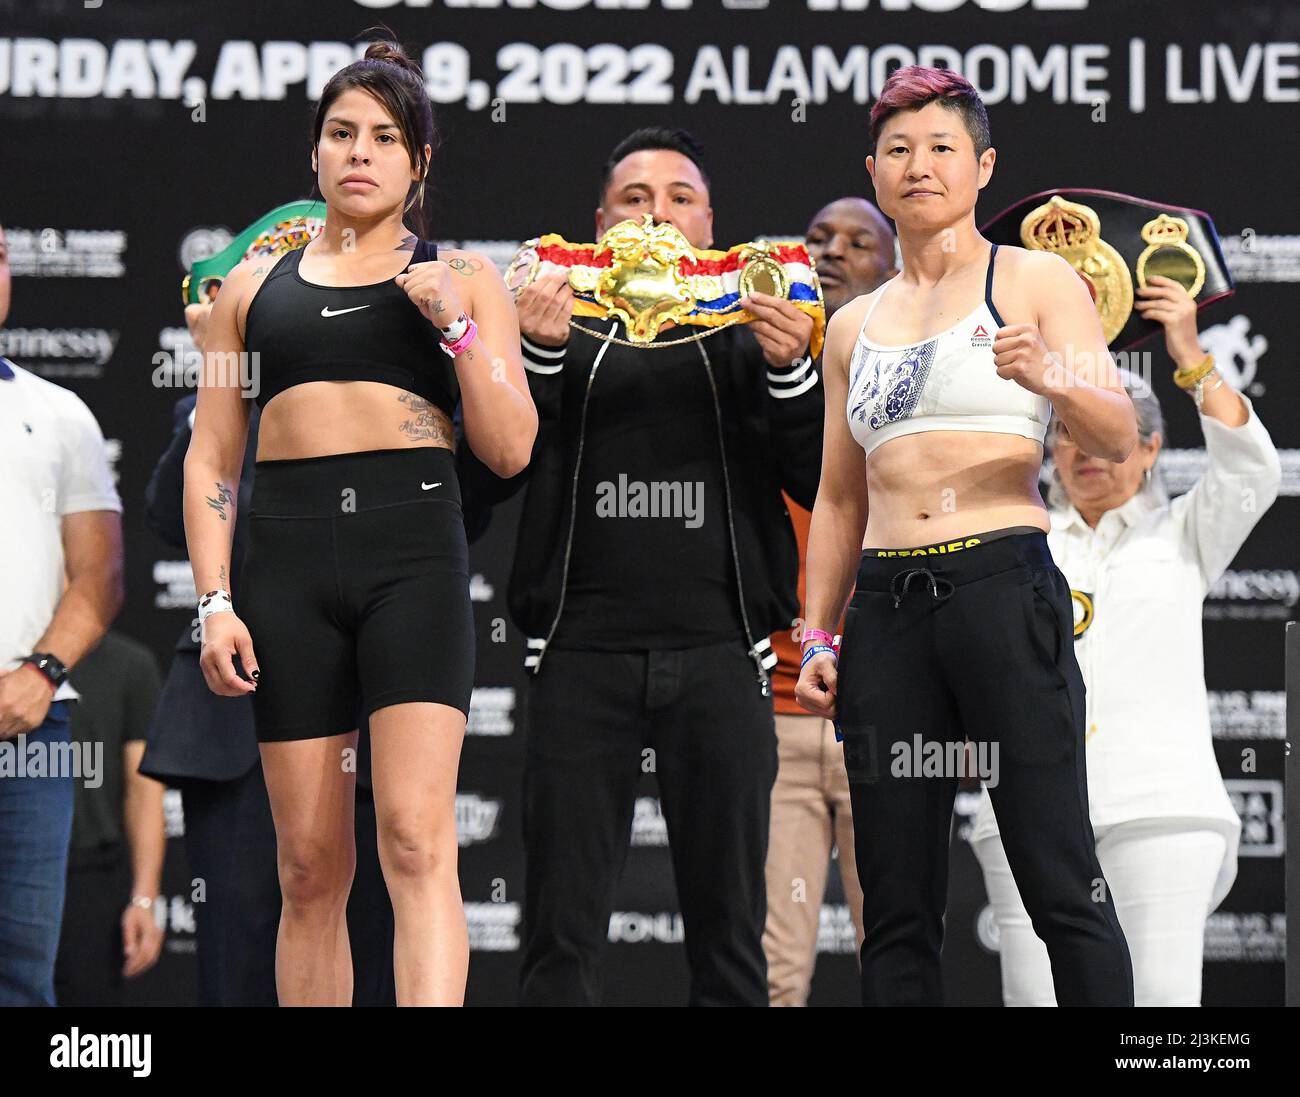 Texas, USA. 08th Apr, 2022. SAN ANTONIO, TX - APRIL 8: (L-R) Marlen Esparza (111.4lbs) and Naoka Fujioka (111.6) face-off for the WBA, WBC, & Vacant Ring Magazine Flyweight title at the Alamodome Stadium, on April 8, 2022, in San Antonio, Texas, USA (Photo by Mikael Ona/PxImages) Credit: Px Images/Alamy Live News Stock Photo